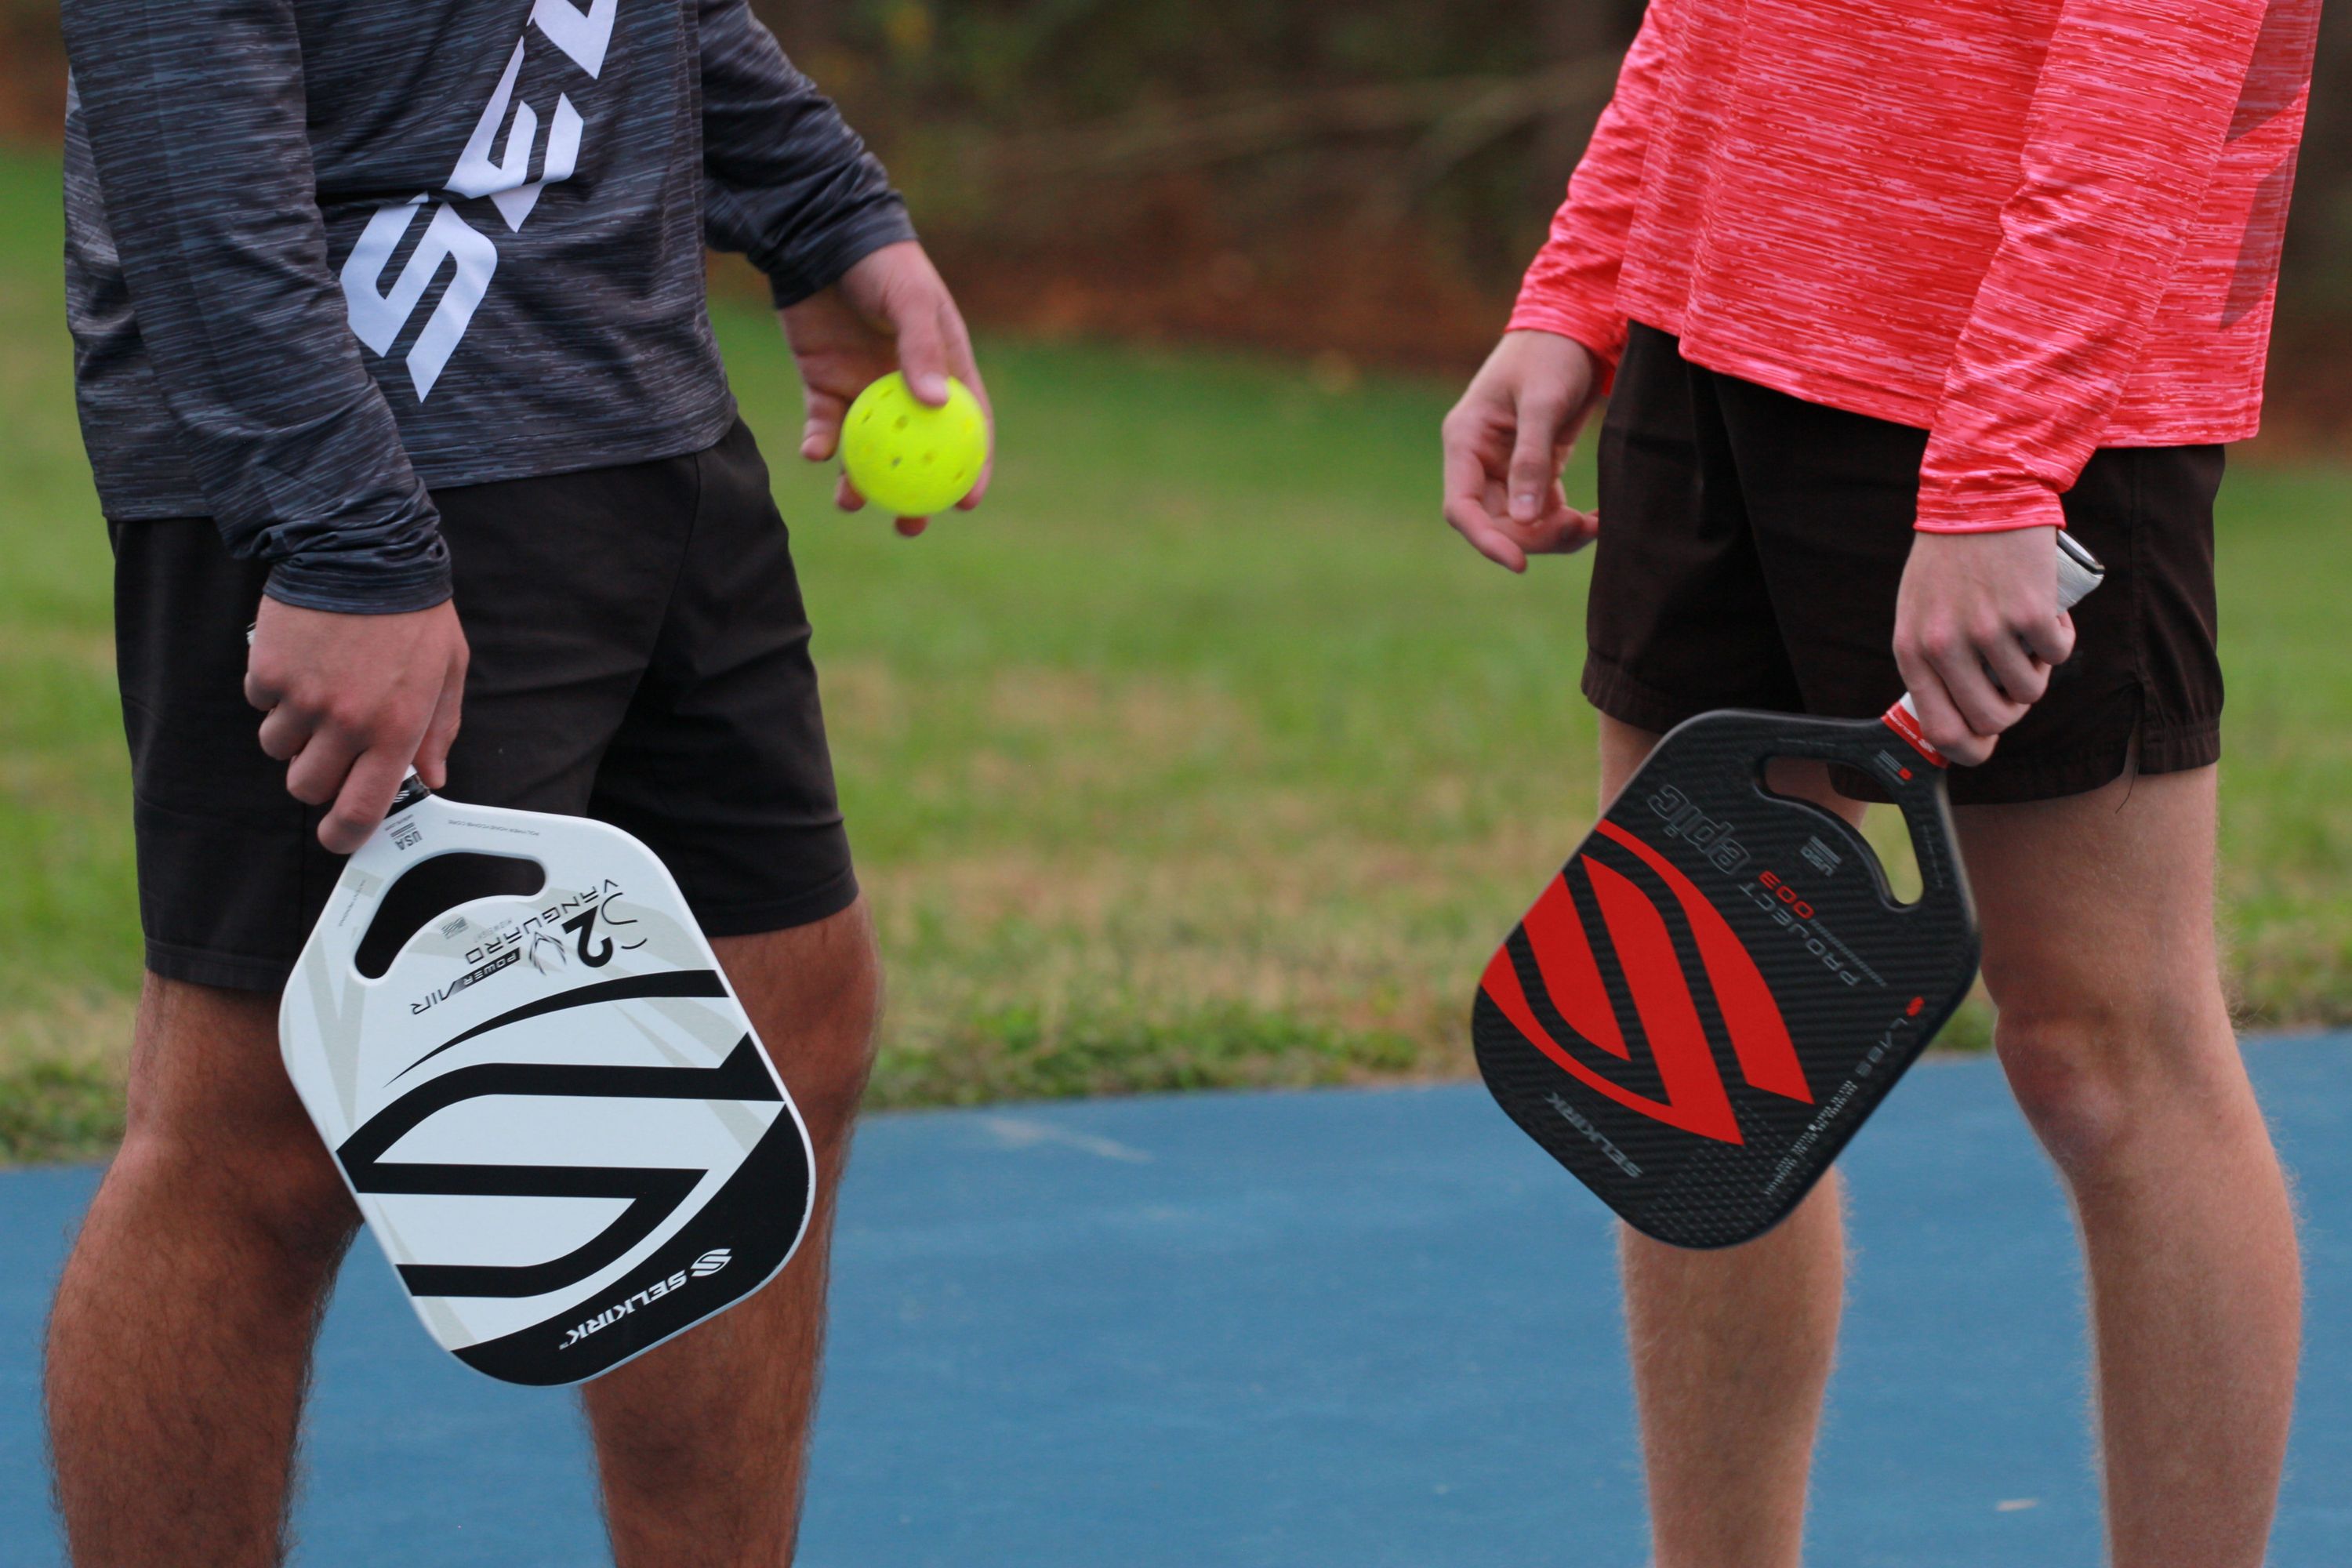 Why is pickleball called pickleball? How did pickleball get its name?